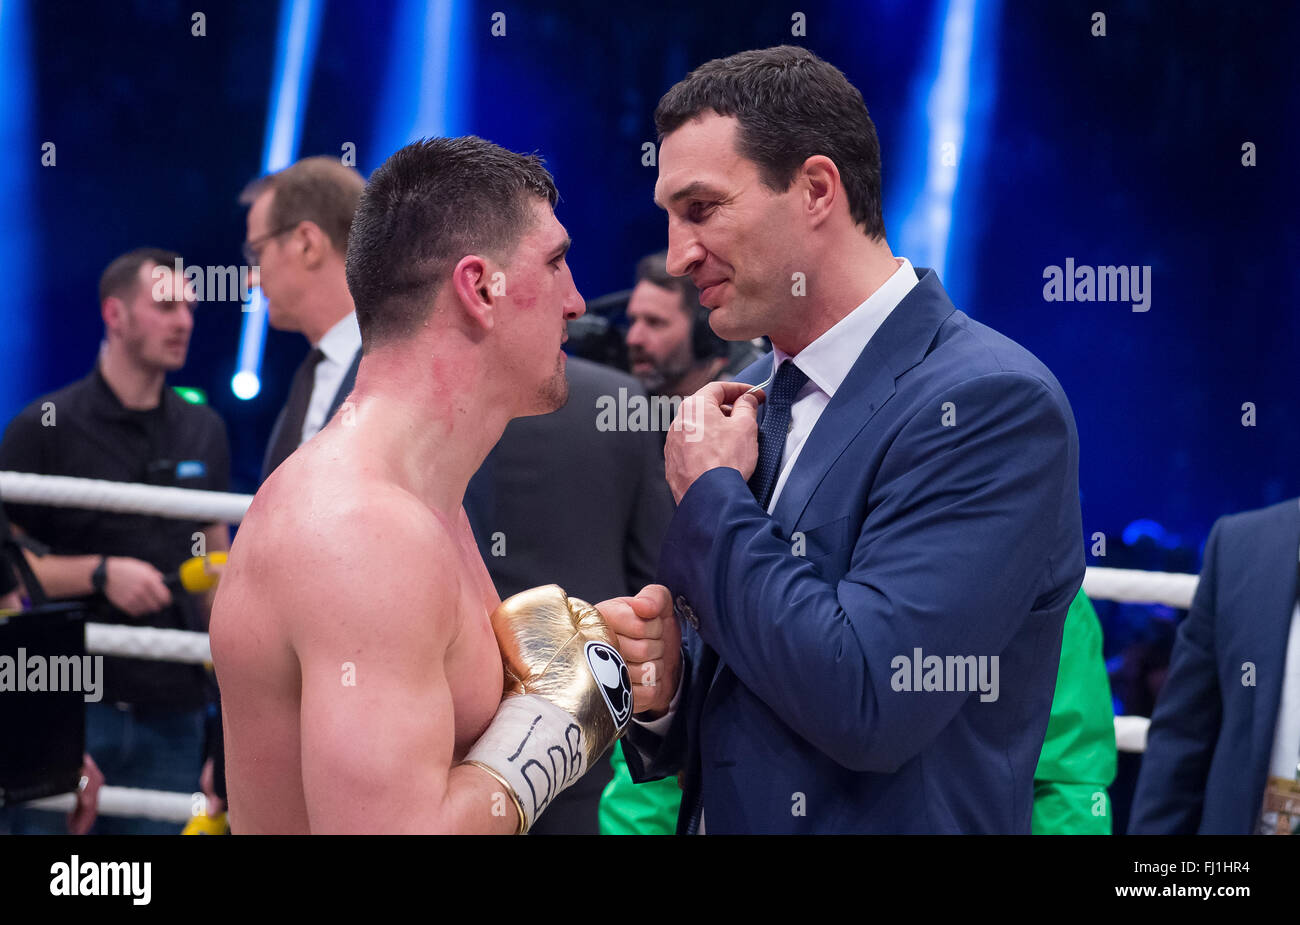 Halle, Germany. 27th Feb, 2016. Marco Huck (L, Germany) stands in the ring with Wladimir Klitschko after his victory against Ola Afolabi (Great Britain) during the cruiserweight boxing match at the IBO World Championships in Halle, Germany, 27 February 2016. Marco Huck won in the 10th round. Photo: GUIDO KIRCHNER/dpa/Alamy Live News Stock Photo